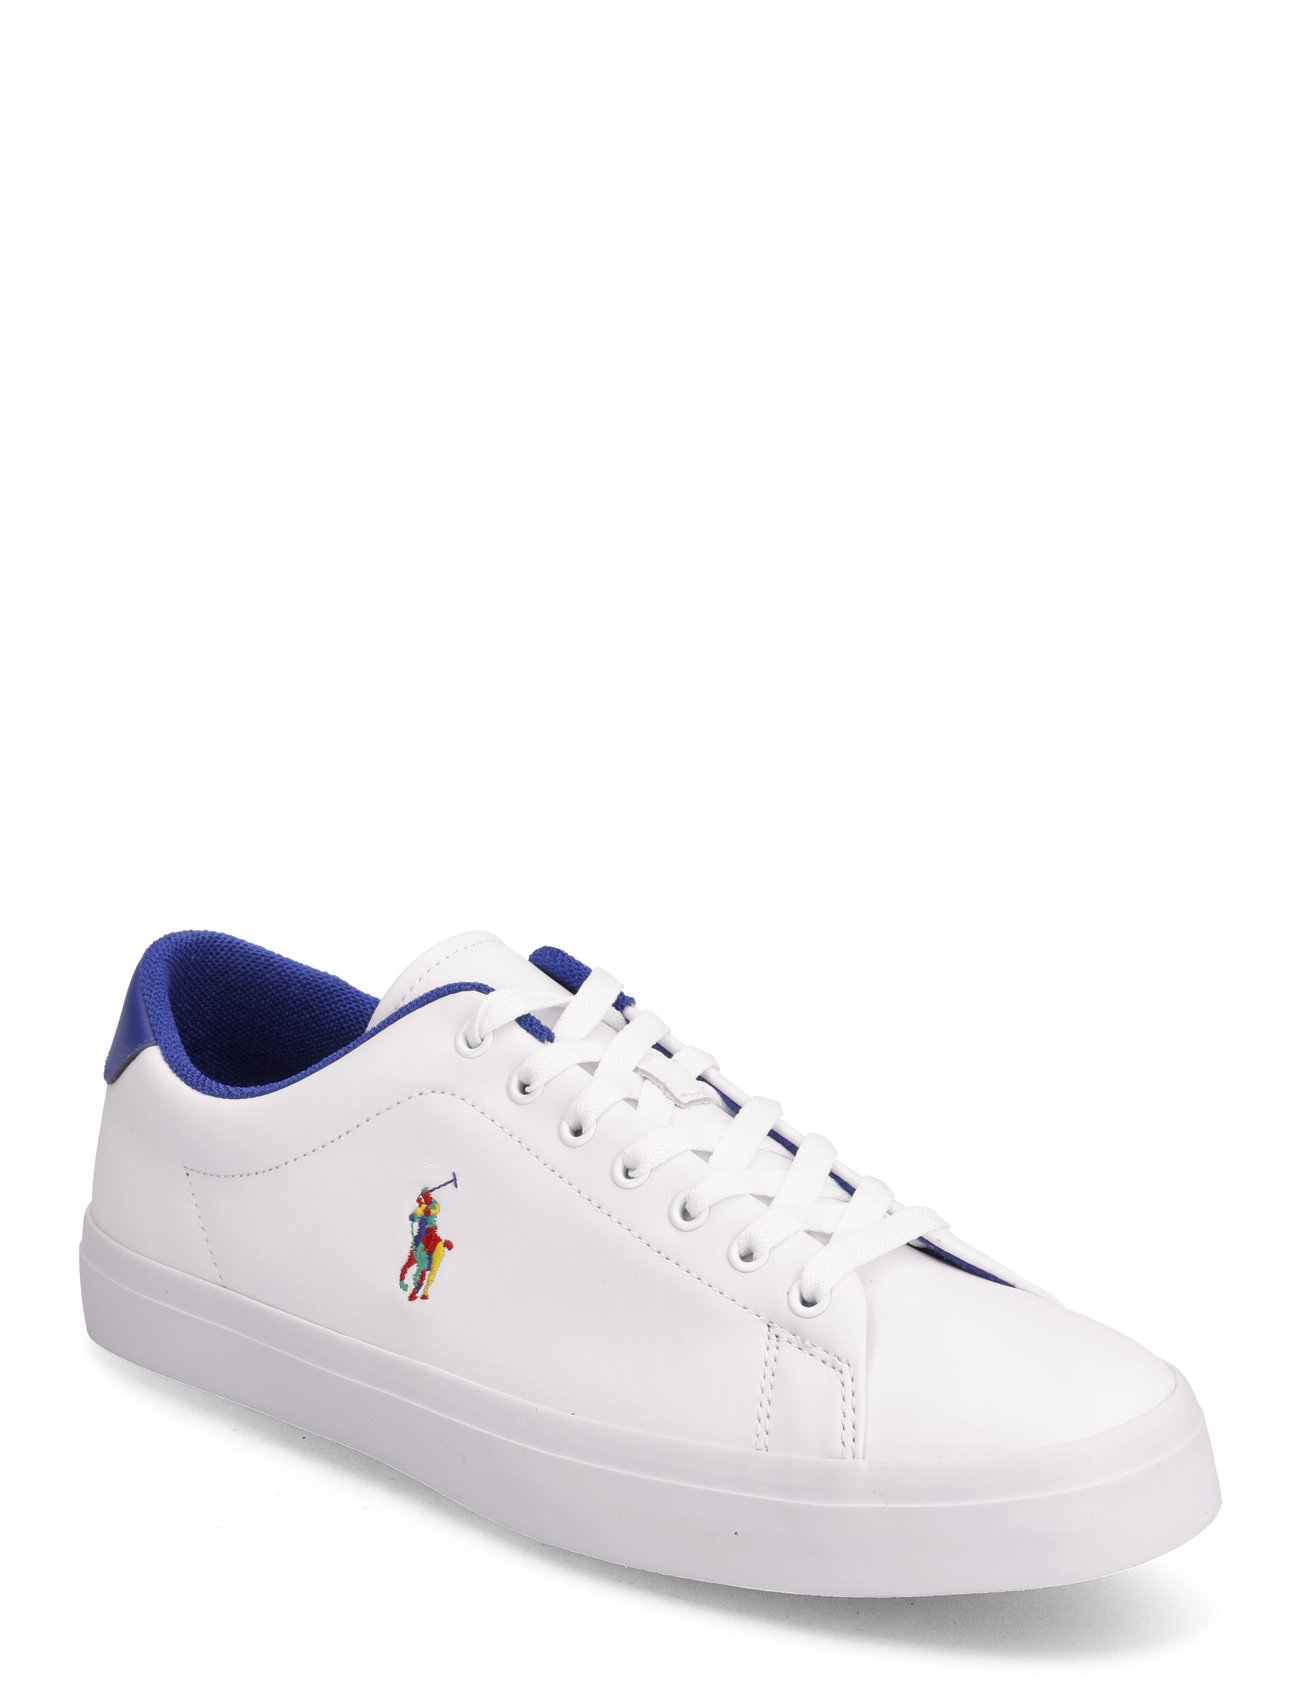 Polo Ralph Lauren Leather Sneaker - Lave sneakers - Boozt.com